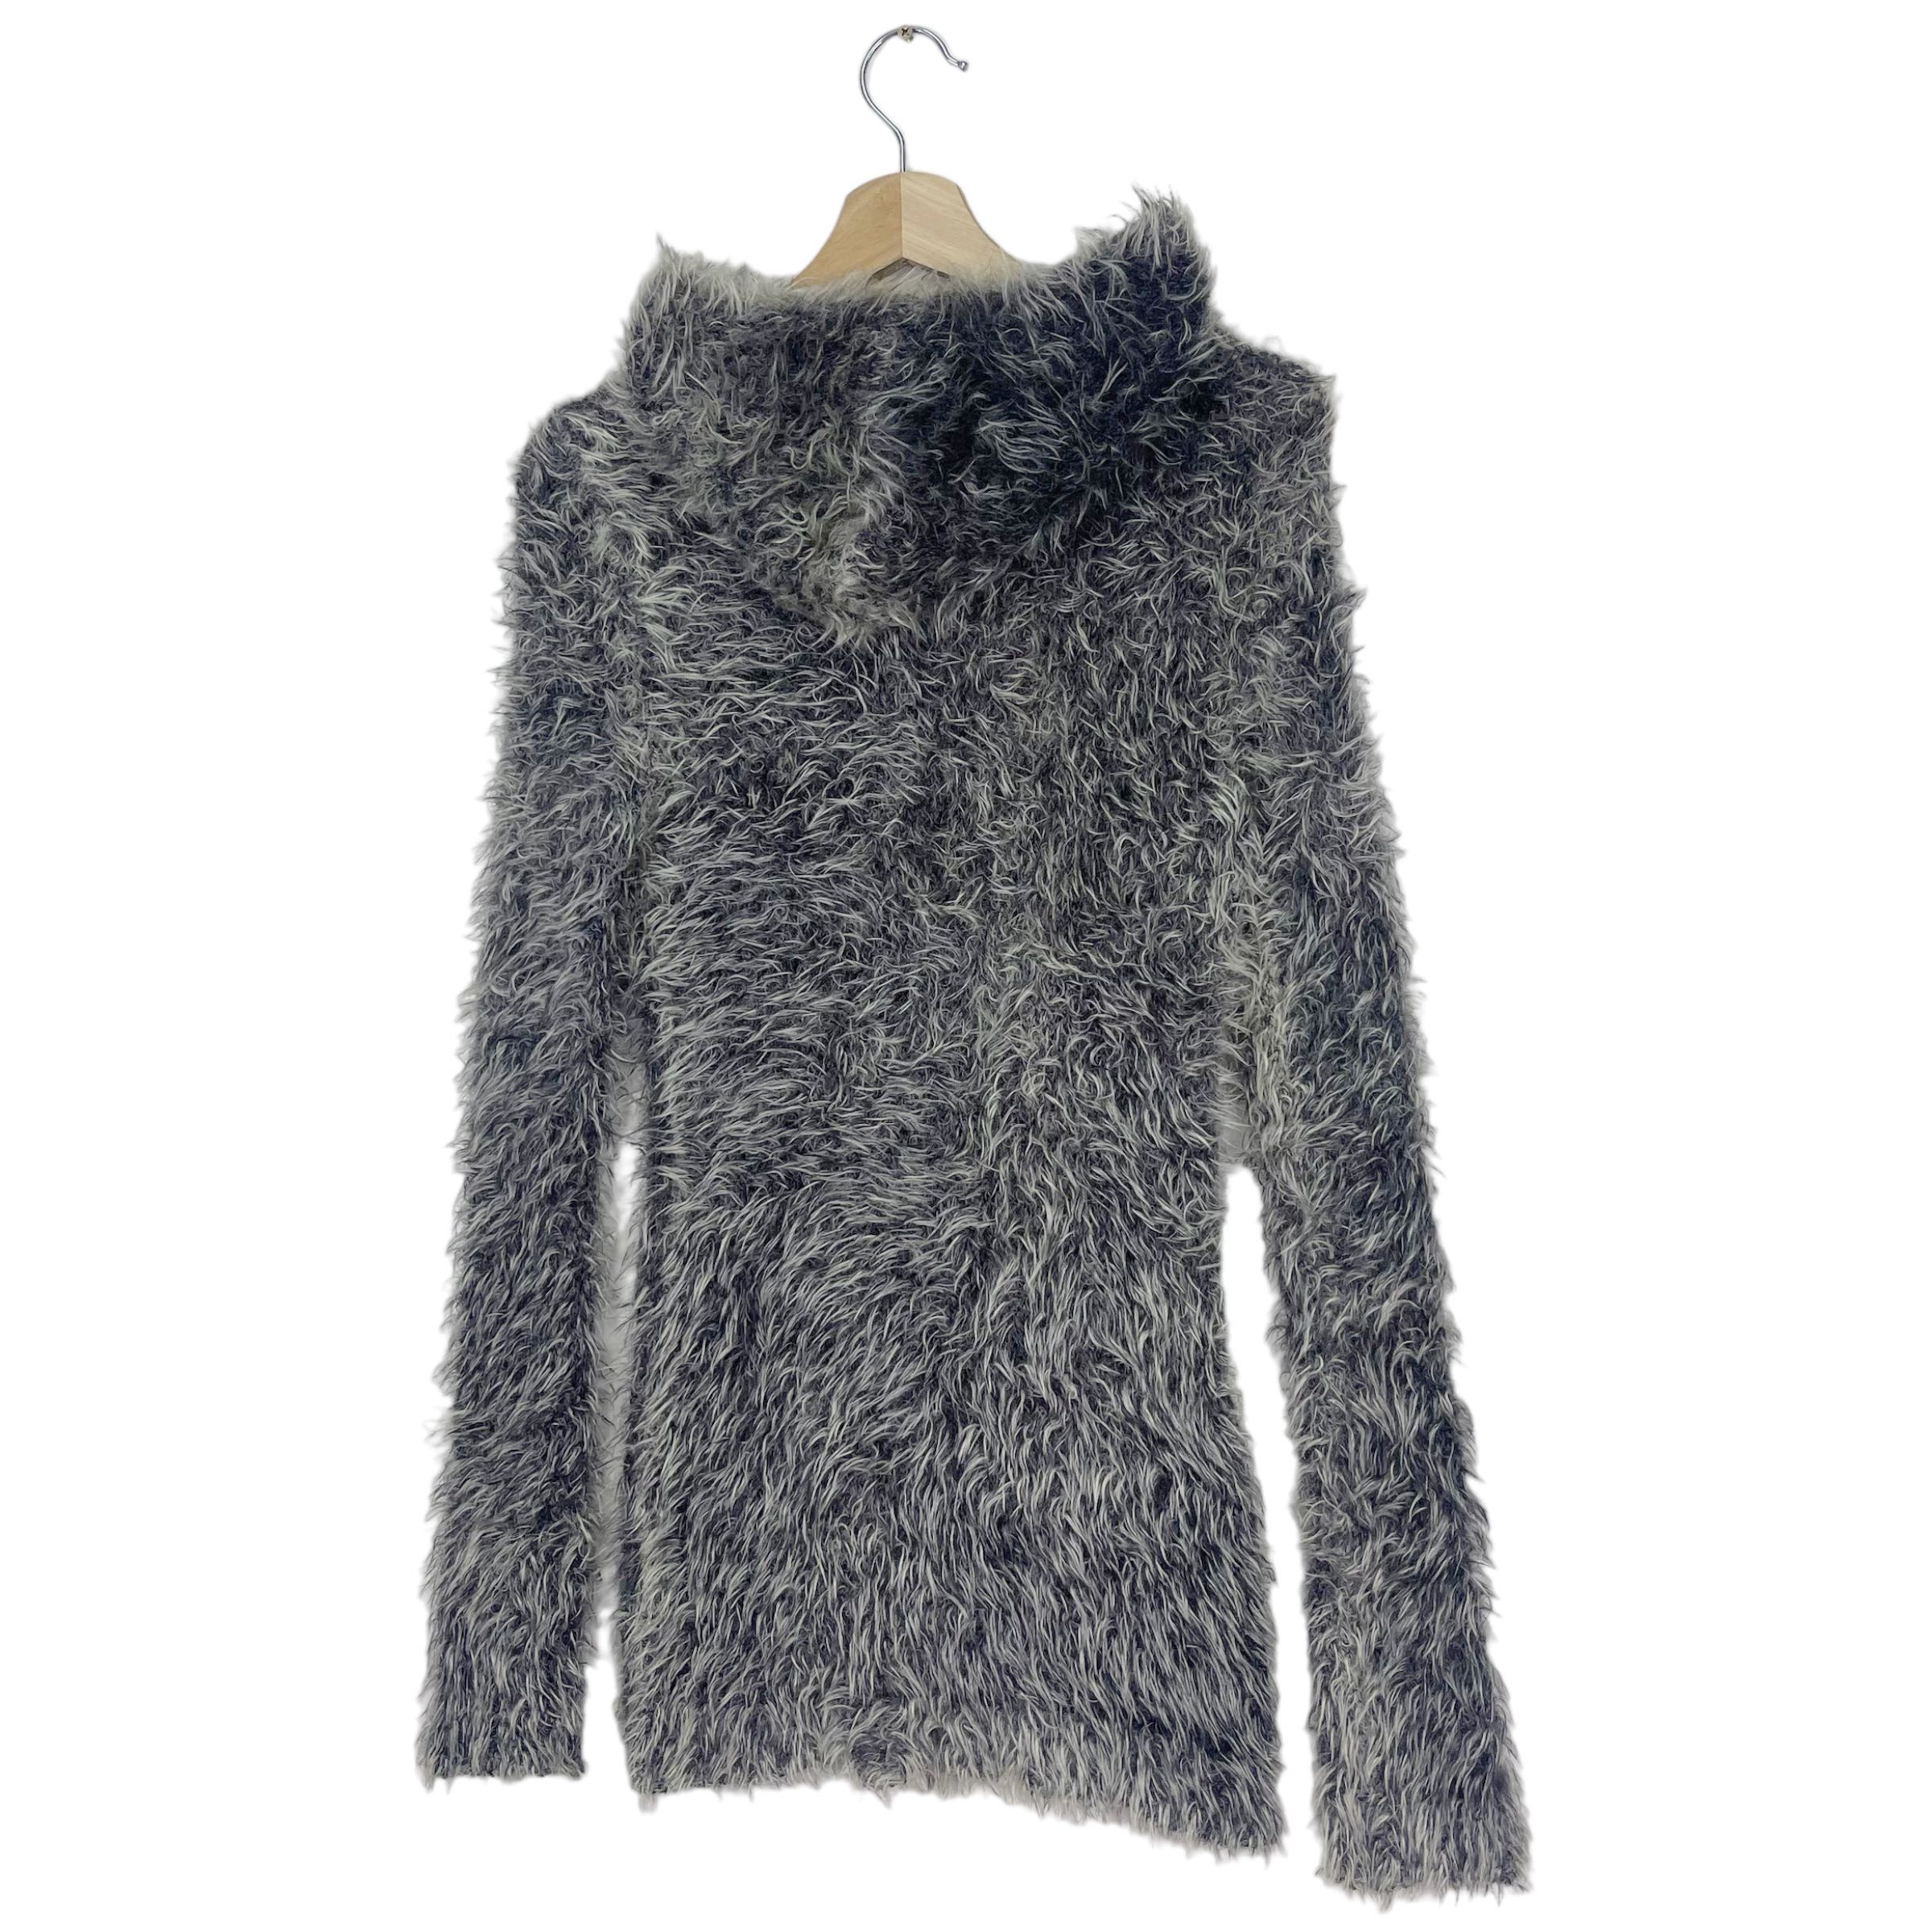 Hysteric Glamour Mohair Fuzzy Sweater - 4